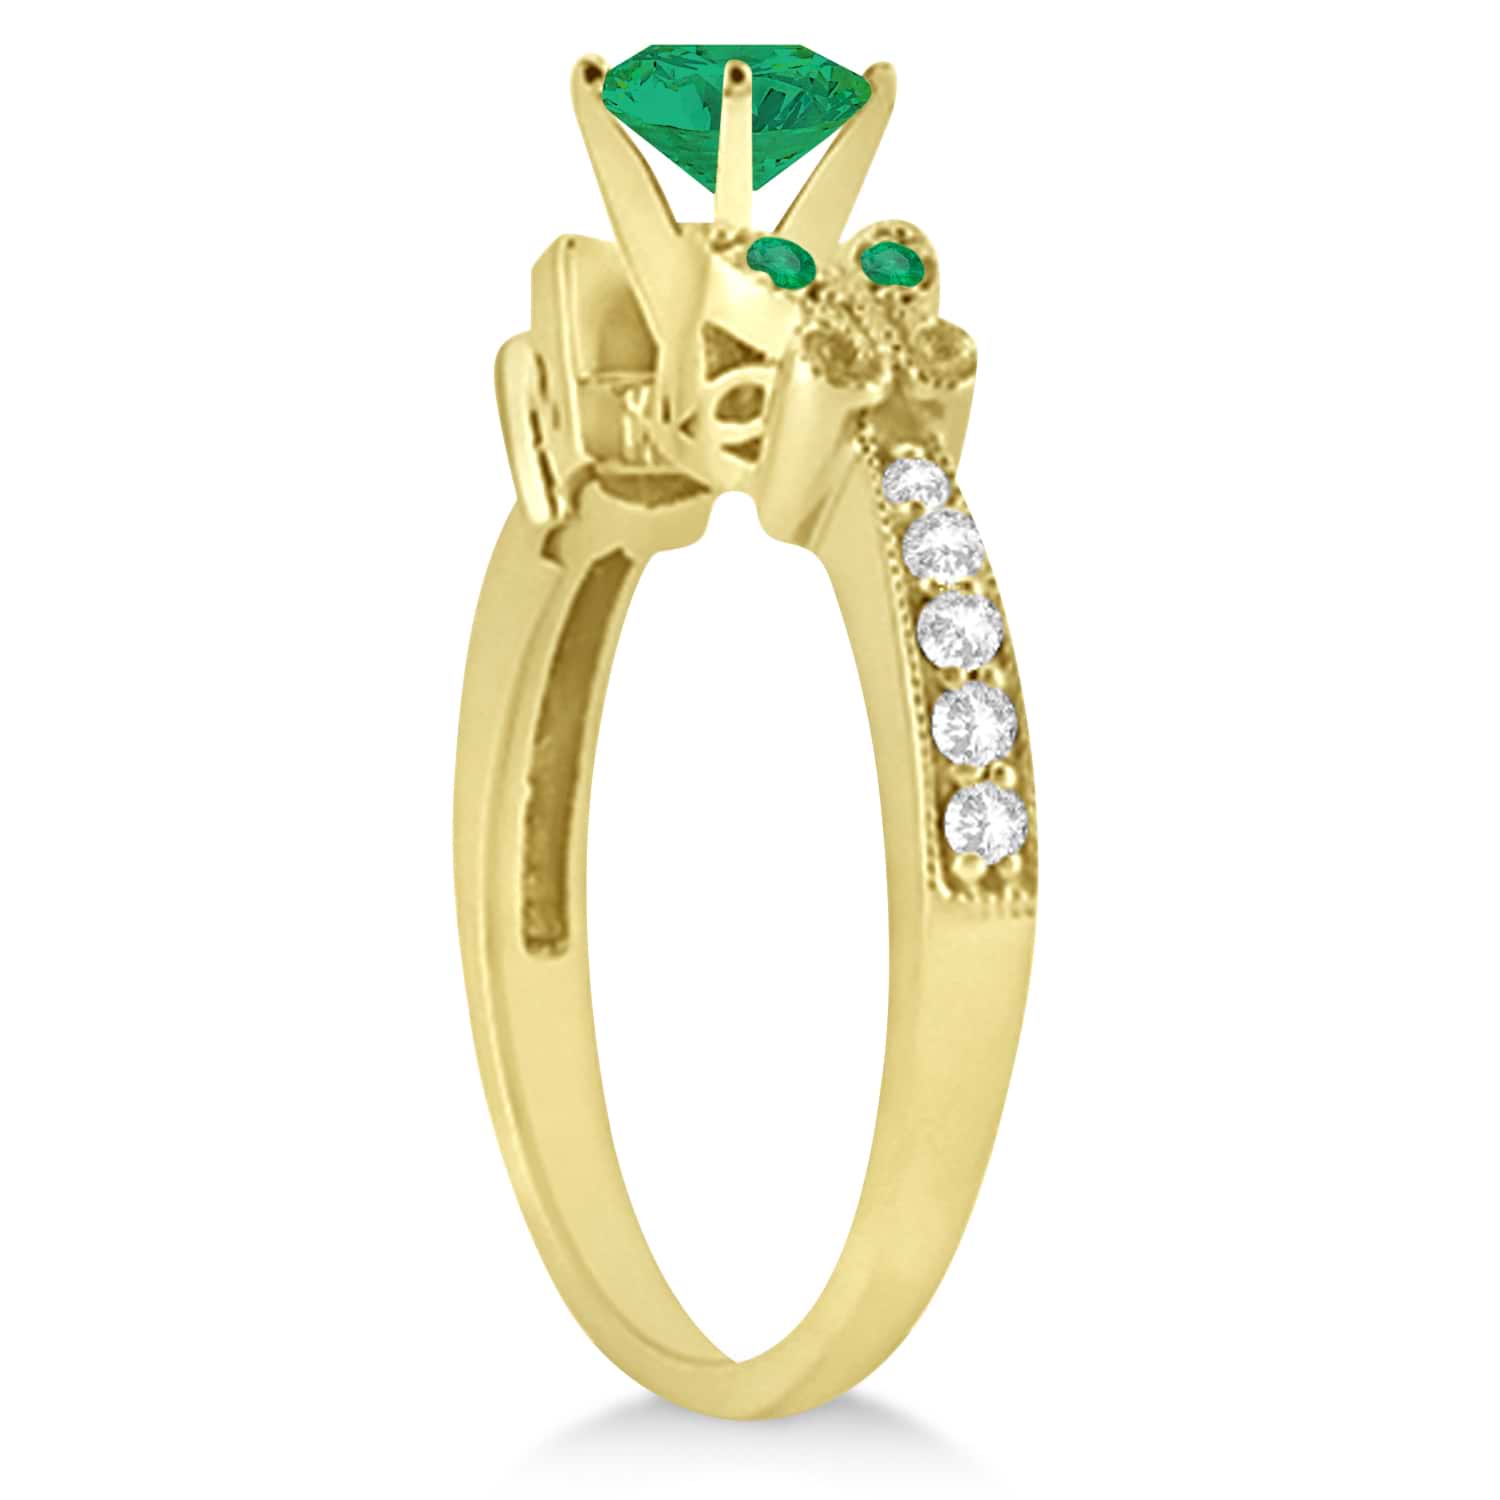 Butterfly Genuine Emerald & Diamond Engagement Ring 14K Yellow Gold 0.71ct